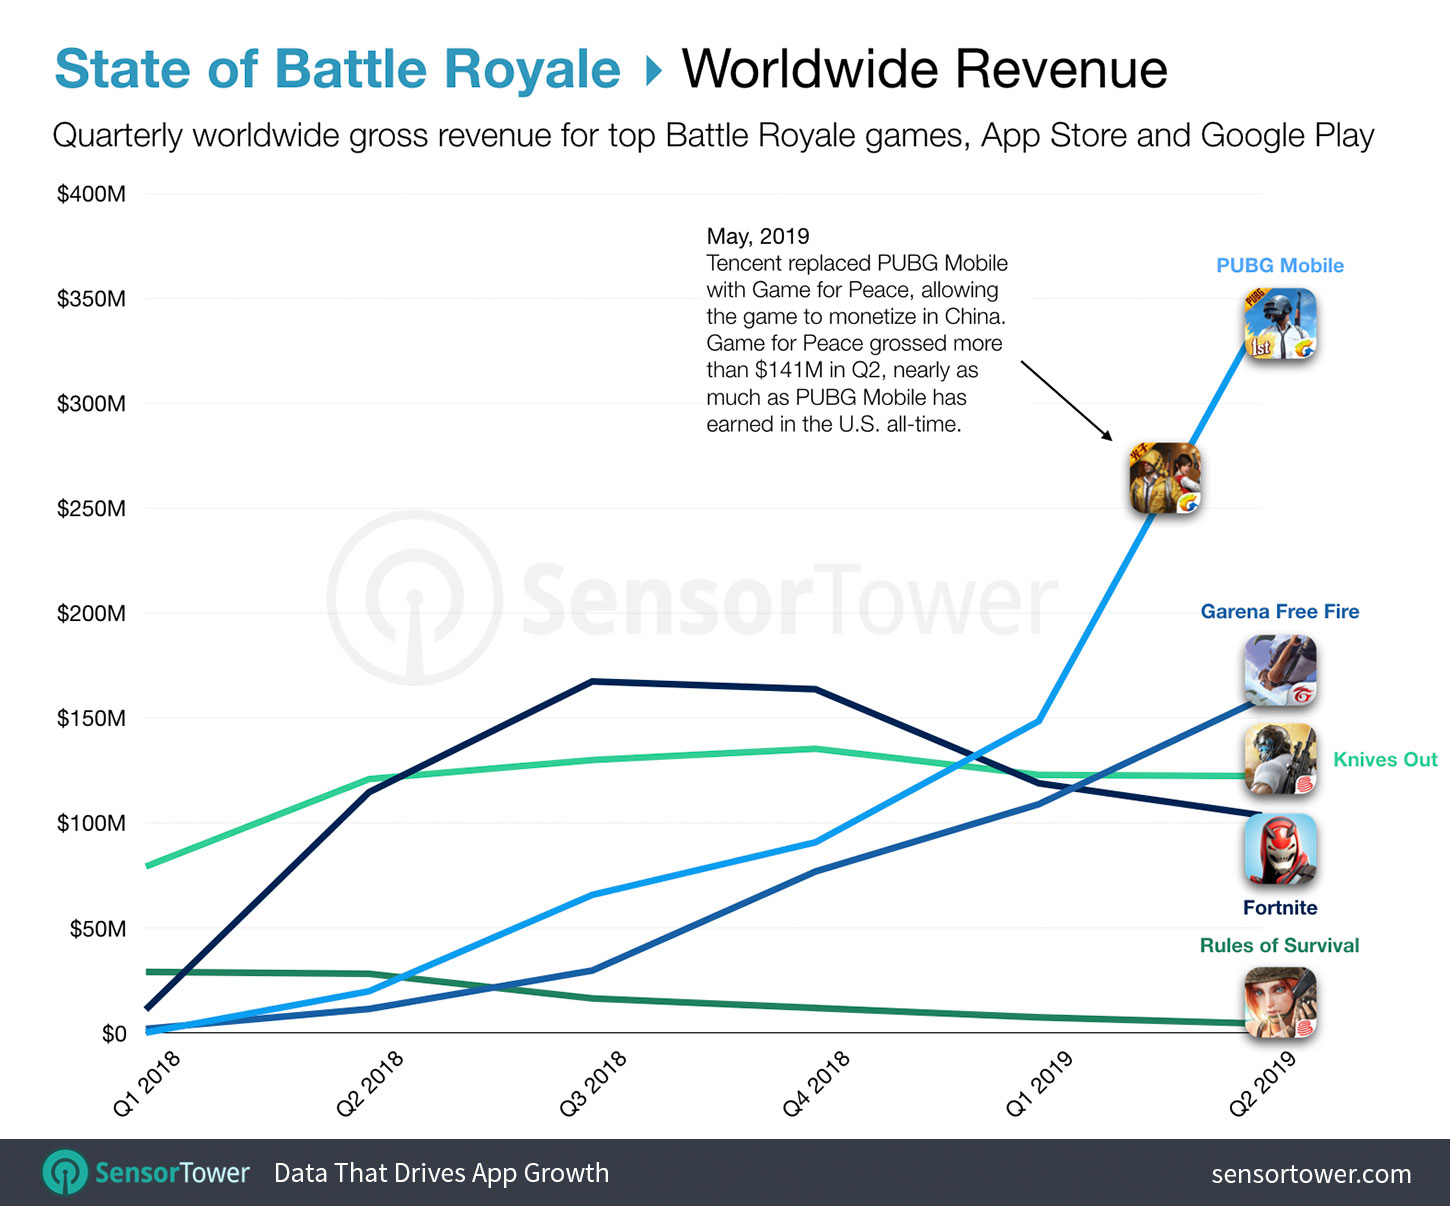 Top Battle Royale Games by Worldwide Revenue from Q1 2018 to Q2 2019